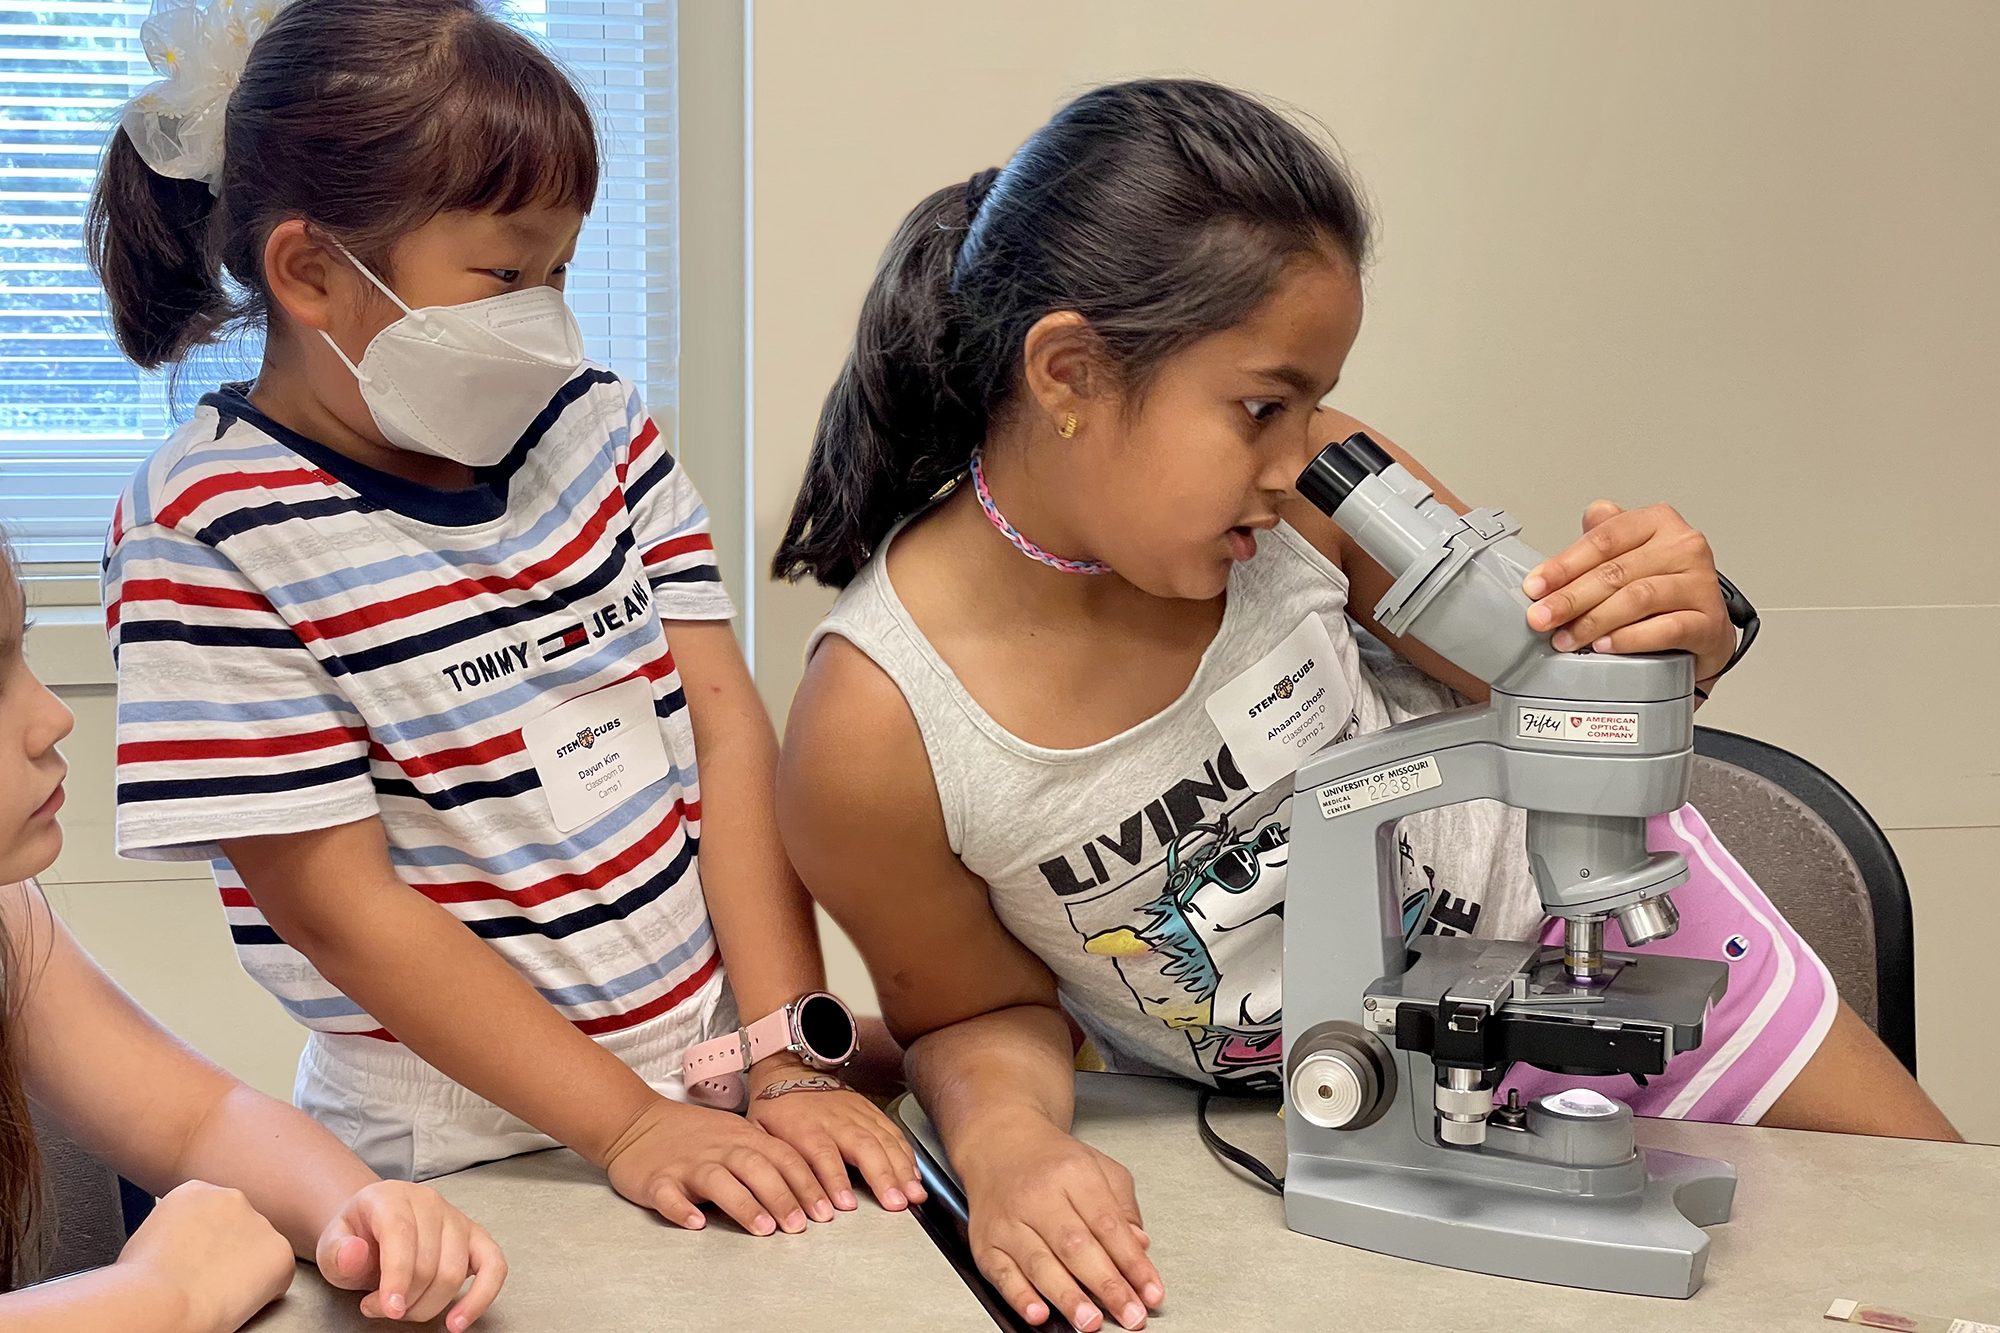 two young girls look at a microscope